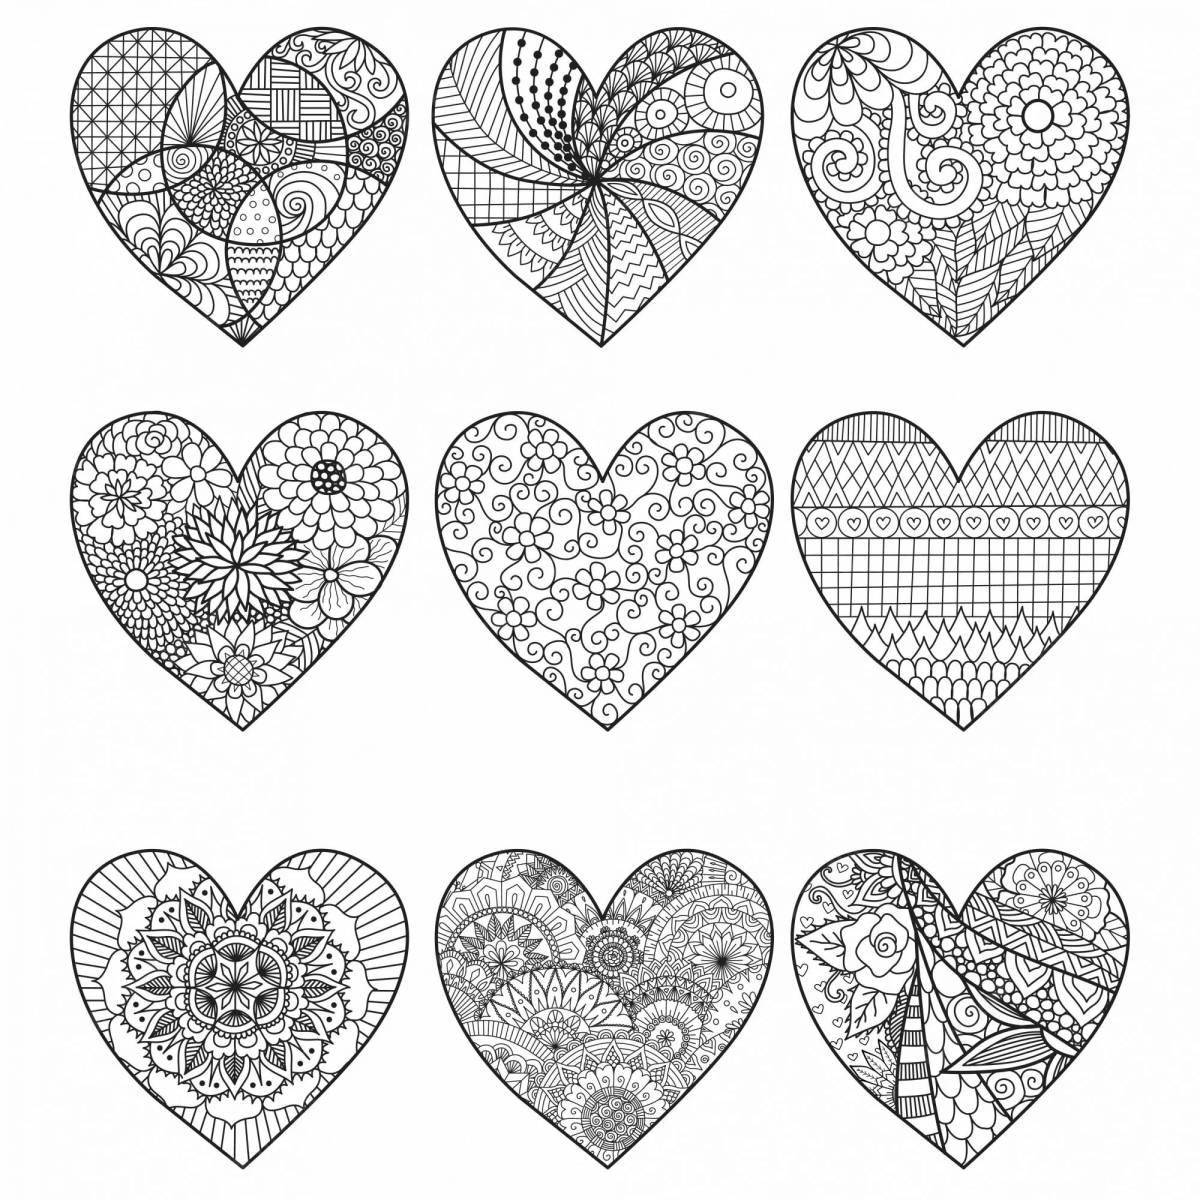 Delightful intricate heart coloring page